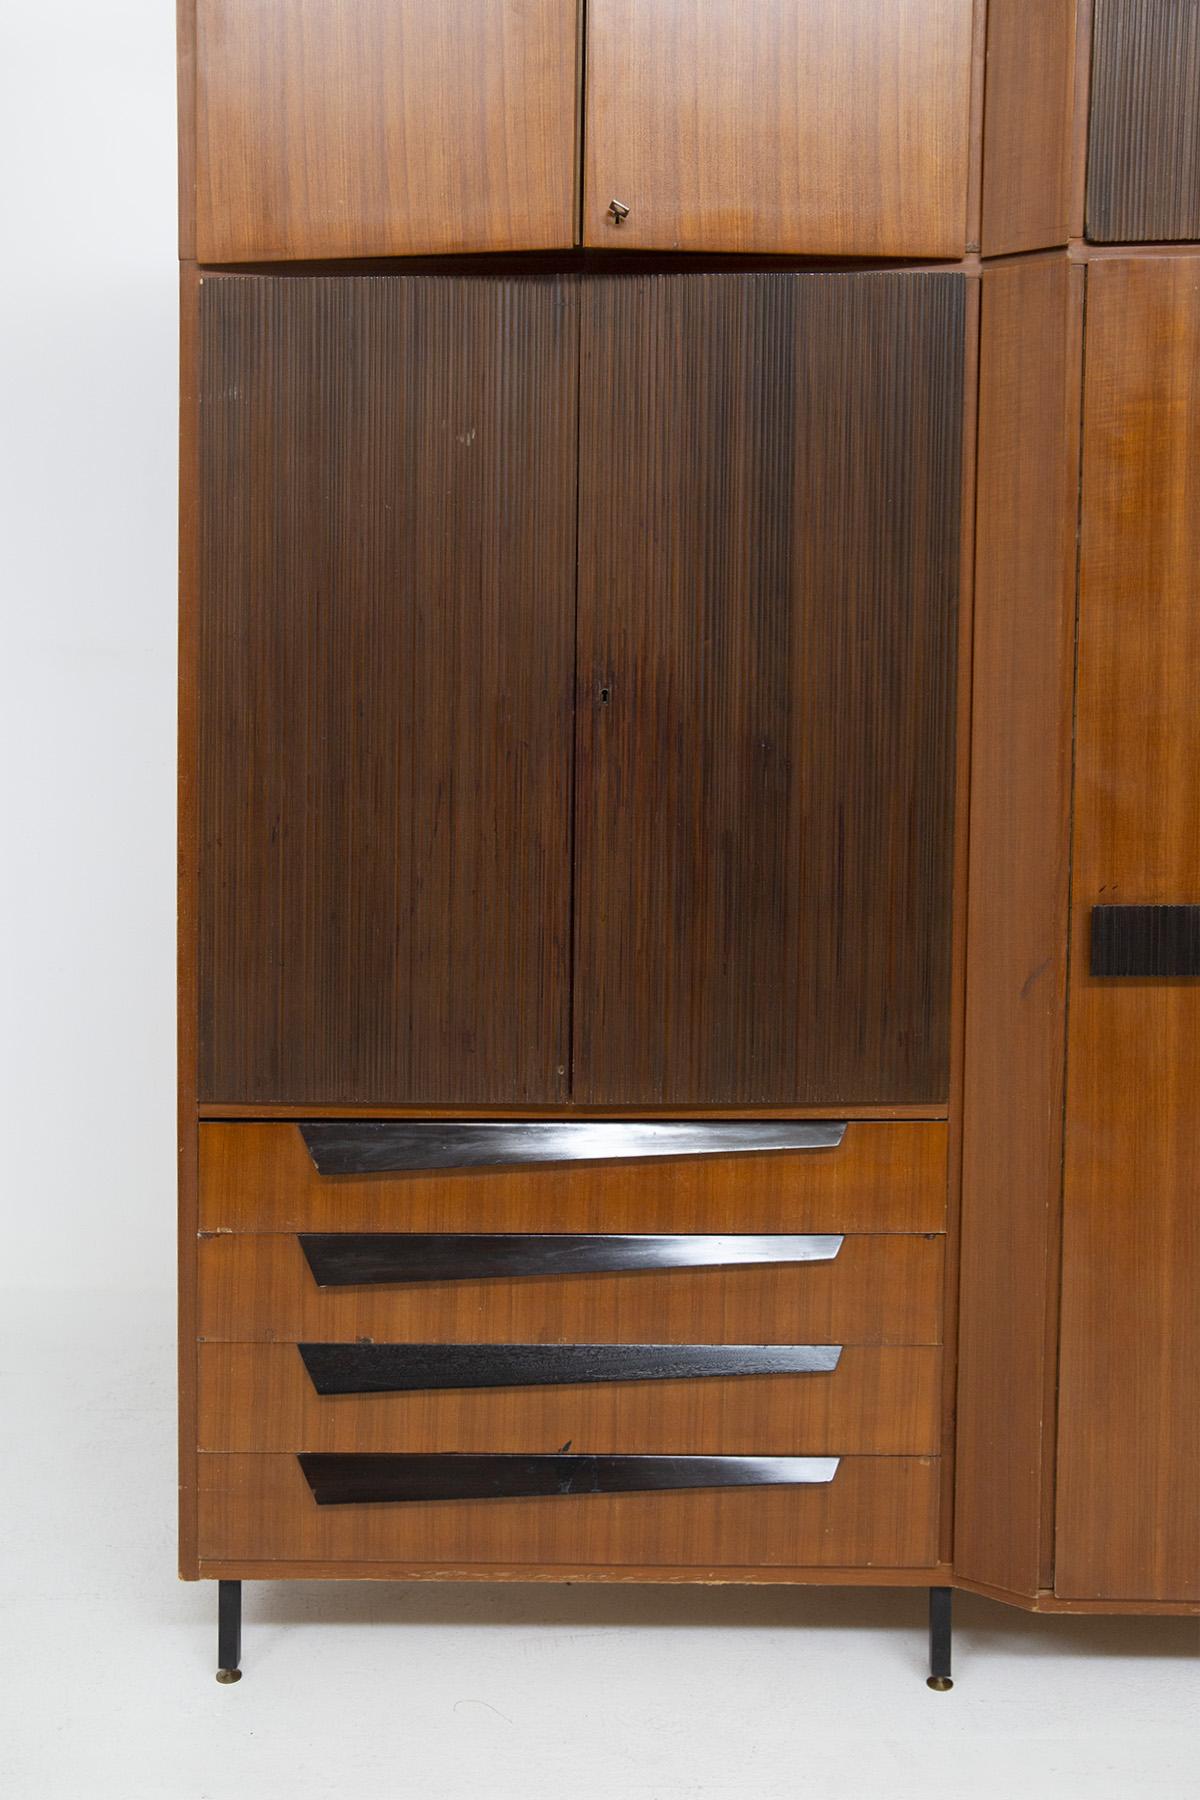 This important cabinet is made by fine Italian manufacture in the ‘50s. It was exhibited at La Permanente Mobili Cantù. The beautiful cabinet is made of fine walnut and grissinato wood: the darker wood is the grissinato and it is used to decorate